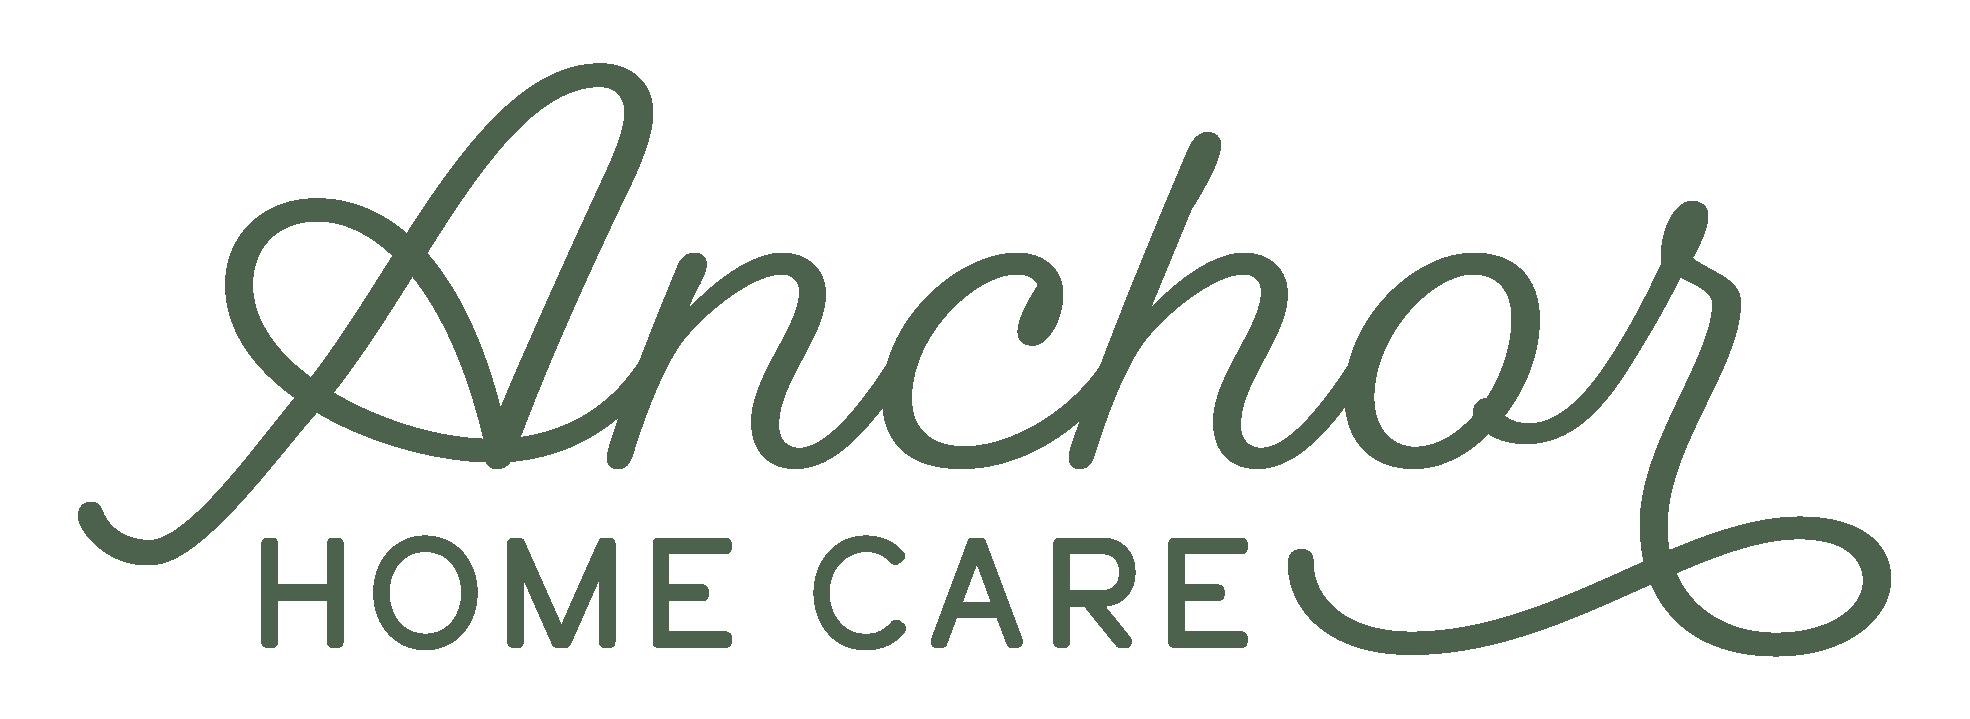 Anchor Home Care_Primary_Olive.png